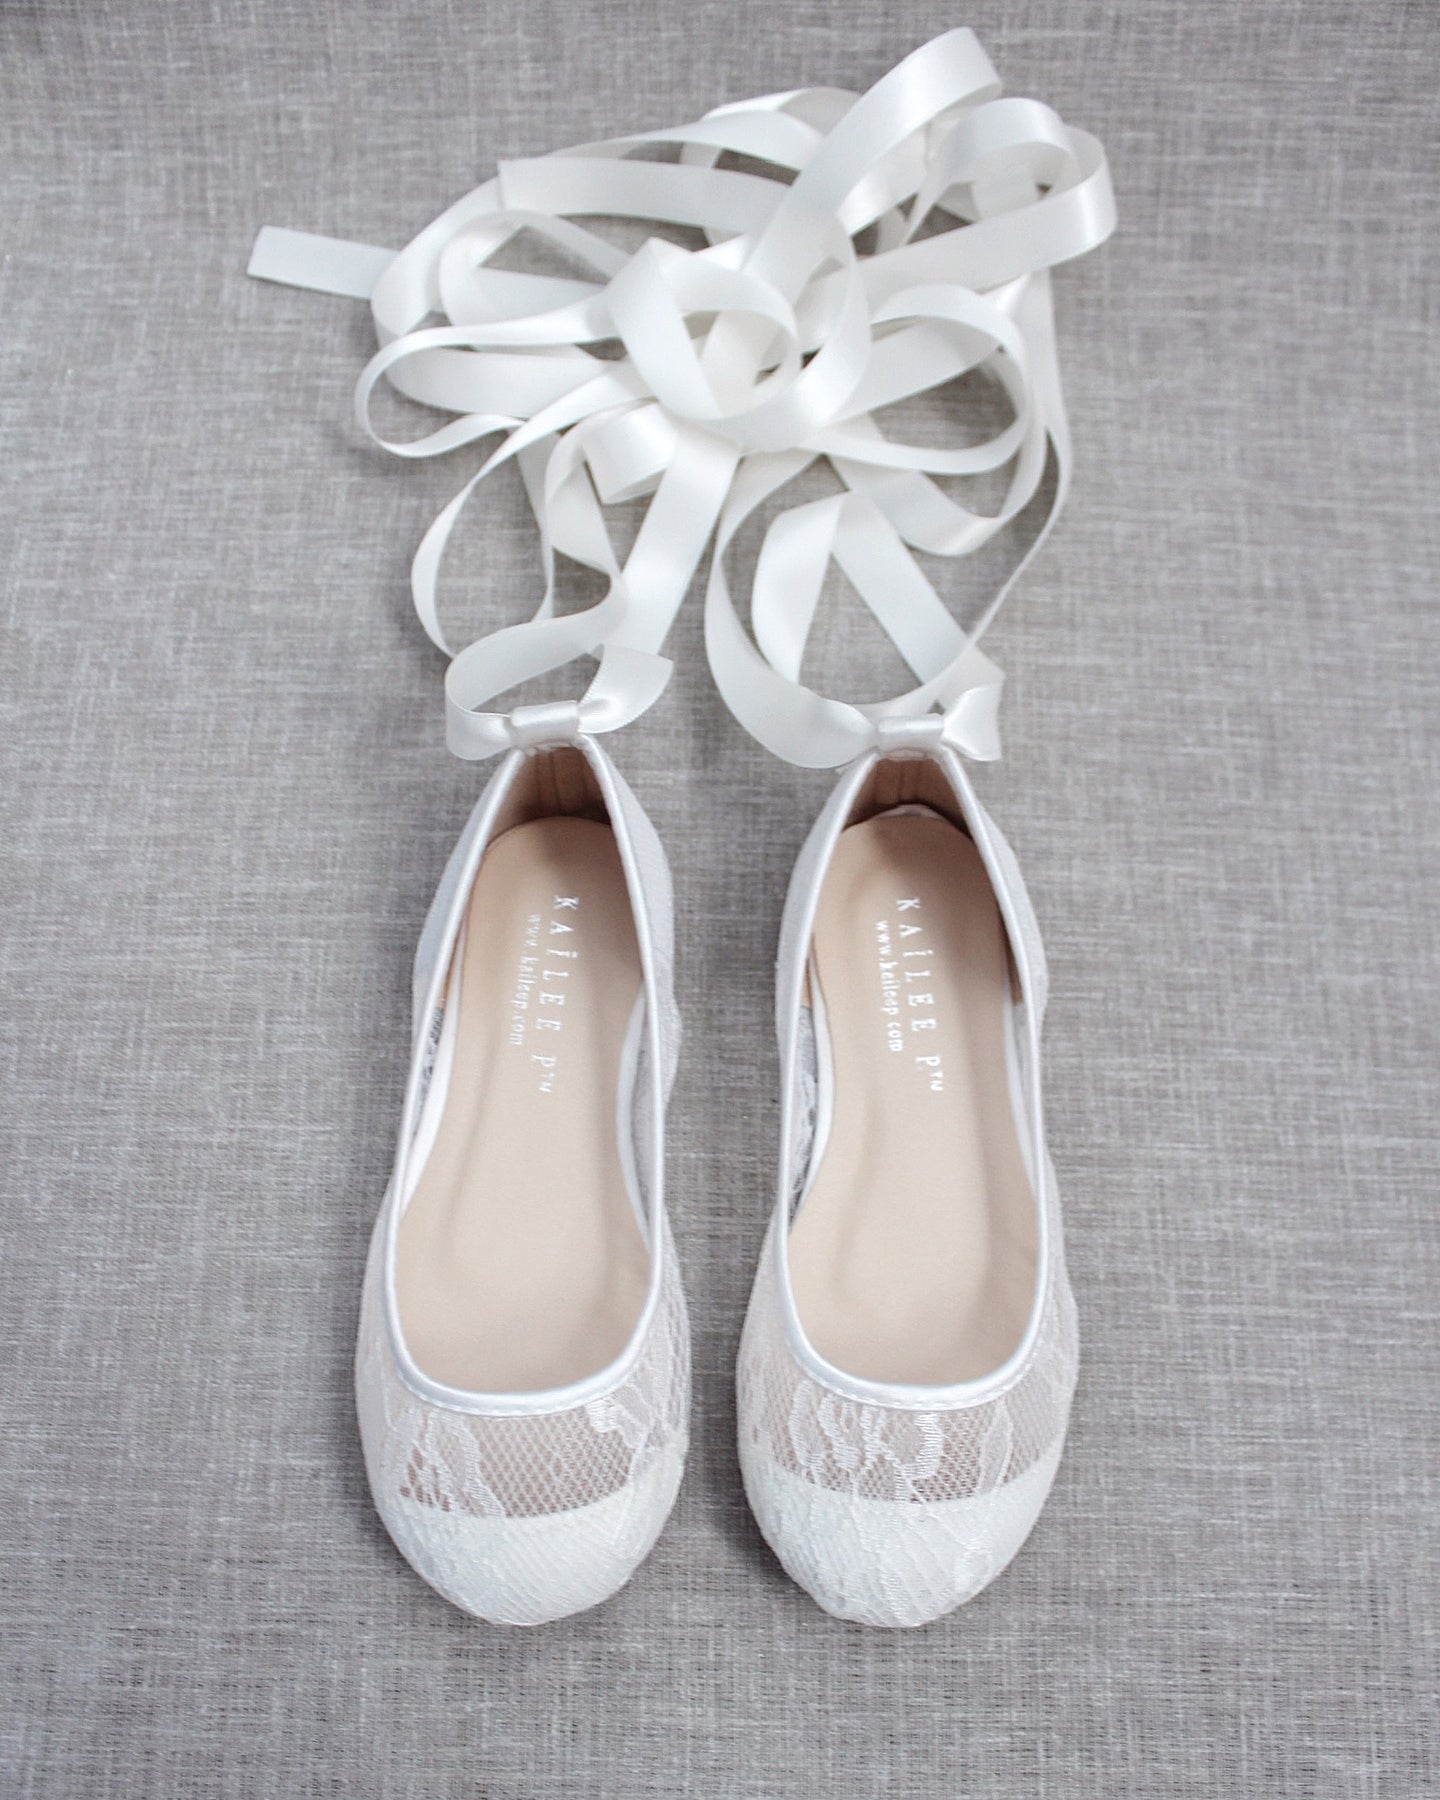 New Lace Ballerina Flats With Ballerina Up - Flower Girls Shoes, Glitter Shoes, Party Shoes